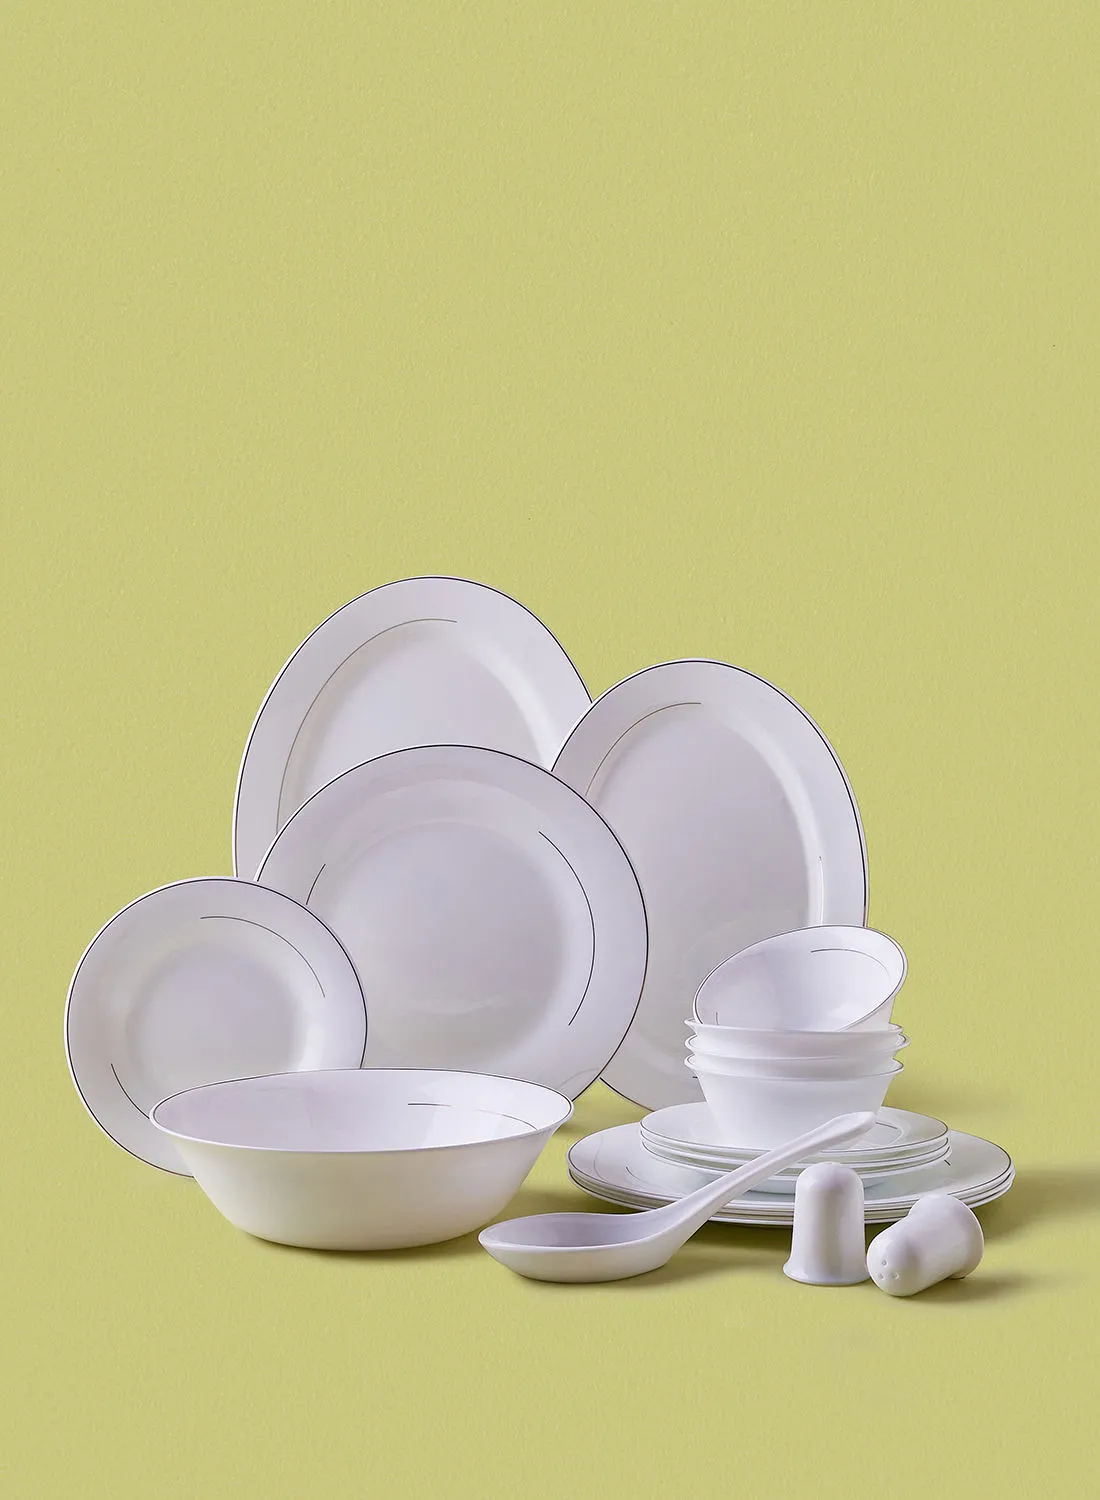 noon east 18 Piece Opalware Dinner Set - Light Weight Dishes, Plates - Dinner Plate, Side Plate, Bowl, Serving Dish And Bowl - Serves 4 - Festive Design Gold Rim Gold